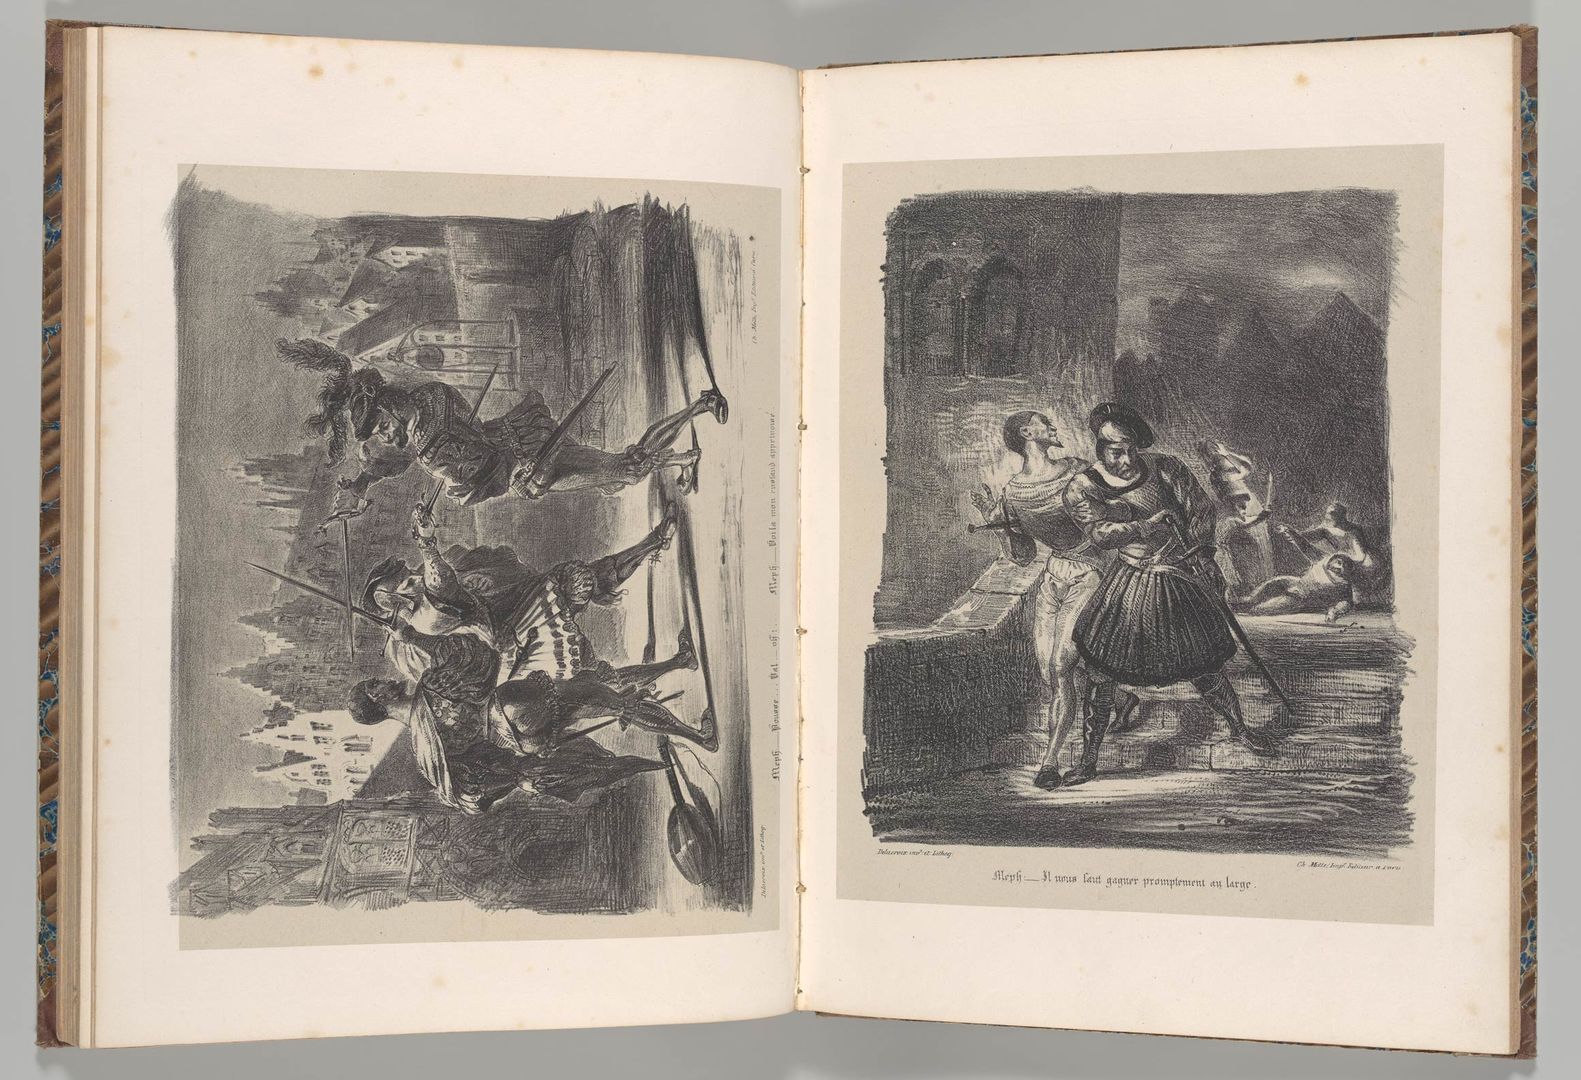 Two Delacroix lithographs of scenes from "Faust": at left, a duel between Faust and Valentine; at right, Mephistopheles and Faust fleeing after the duel